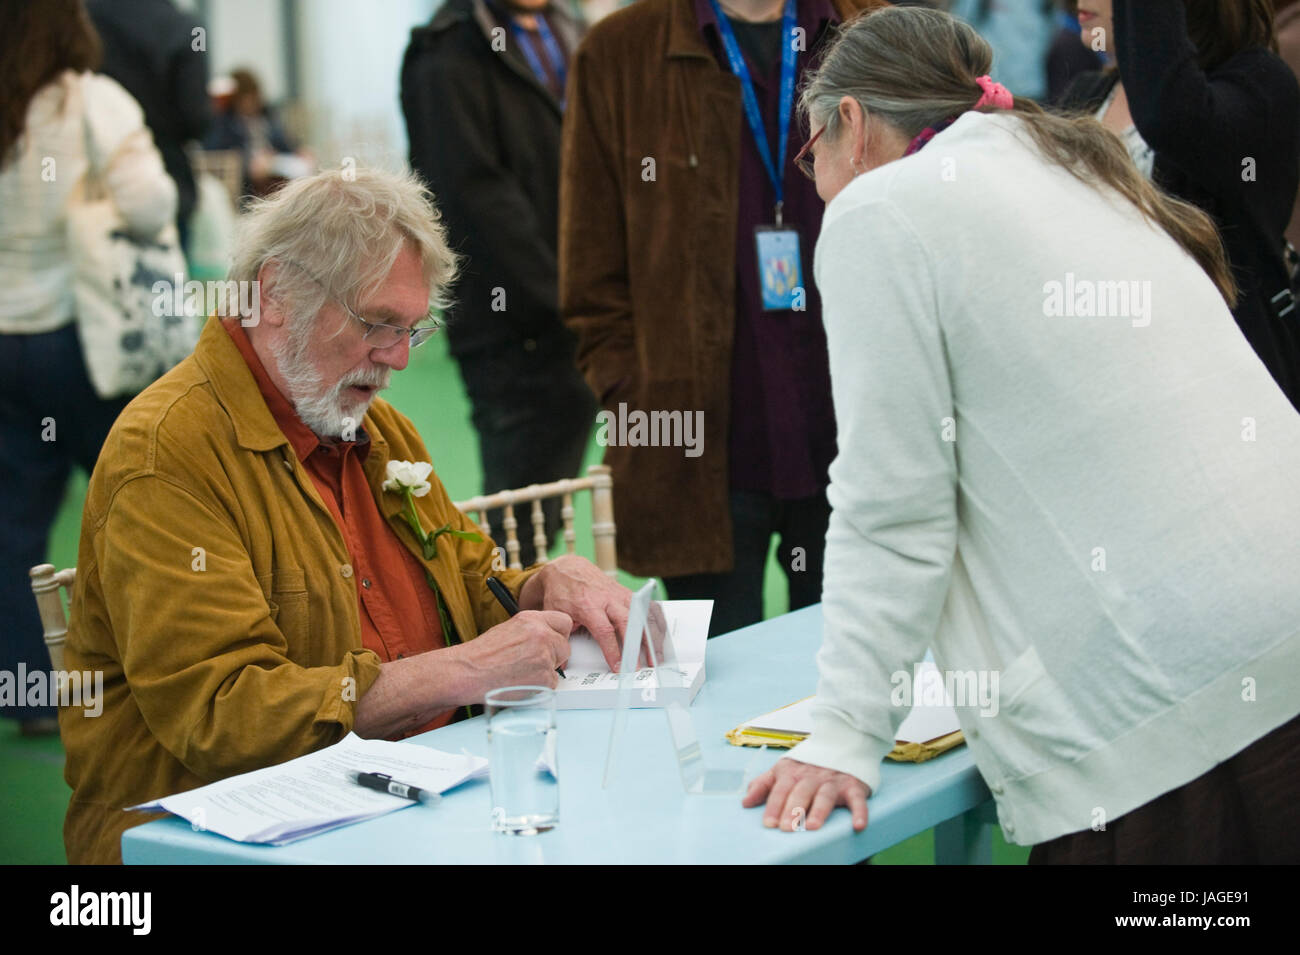 Kent Nerburn American novelist pictured book signing for fans in the bookshop at Hay Festival 2017 Hay-on-Wye Powys Wales UK Stock Photo